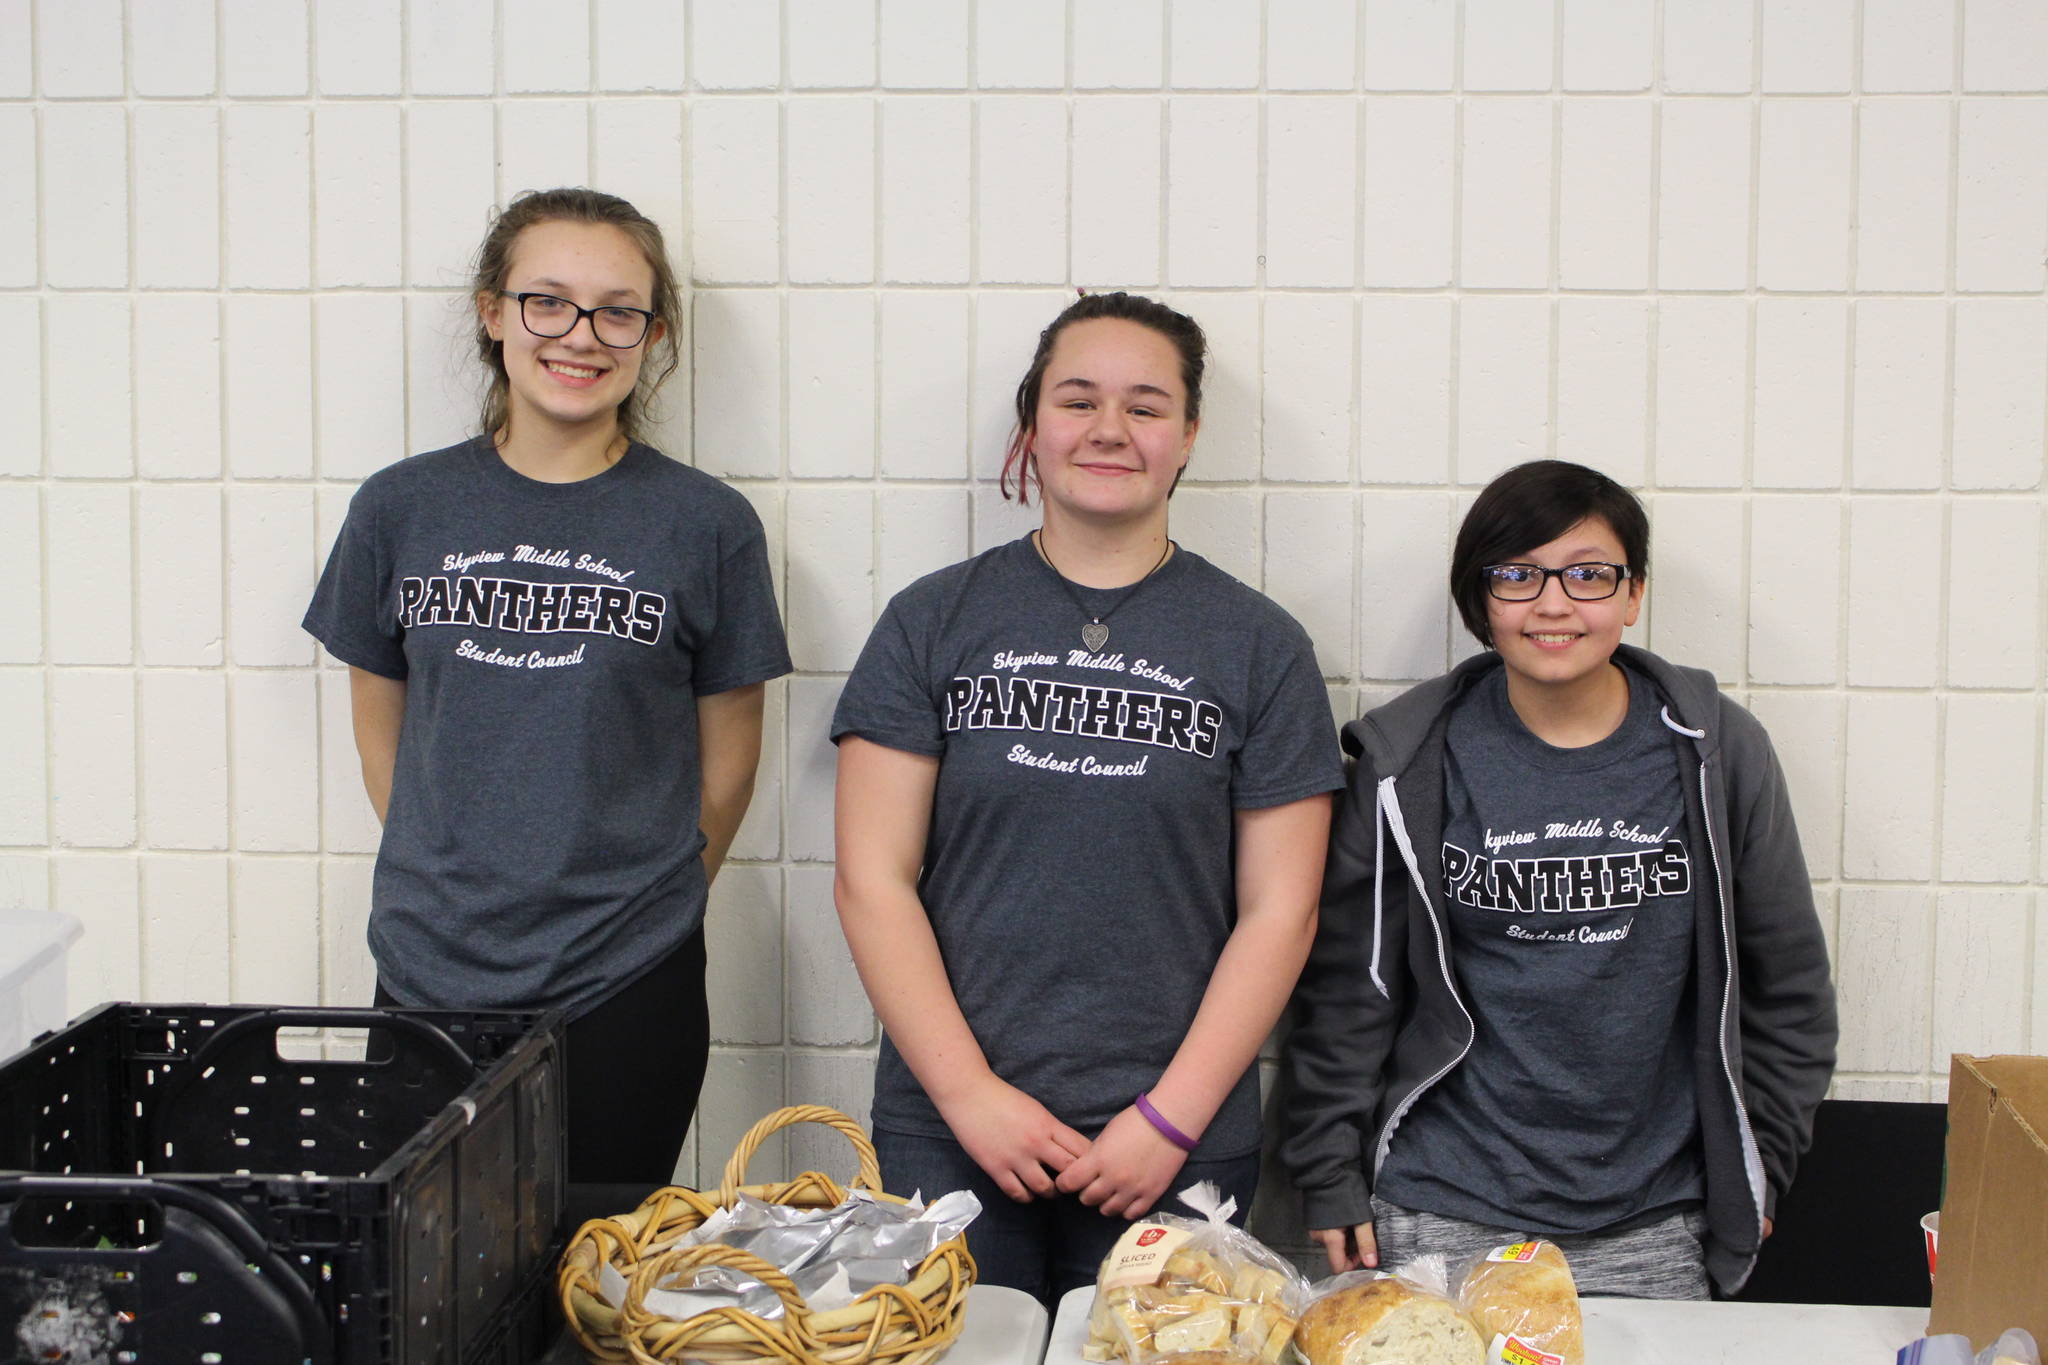 Skyview Middle School students Brooke Walters, Josie Josephson and Milo Gilliam volunteer for the food pantry during the 2020 Project Homeless Connect event at the Soldotna Regional Sports Complex in Soldotna, Alaska, on Jan. 29, 2020. (Photo by Brian Mazurek/Peninsula Clarion)